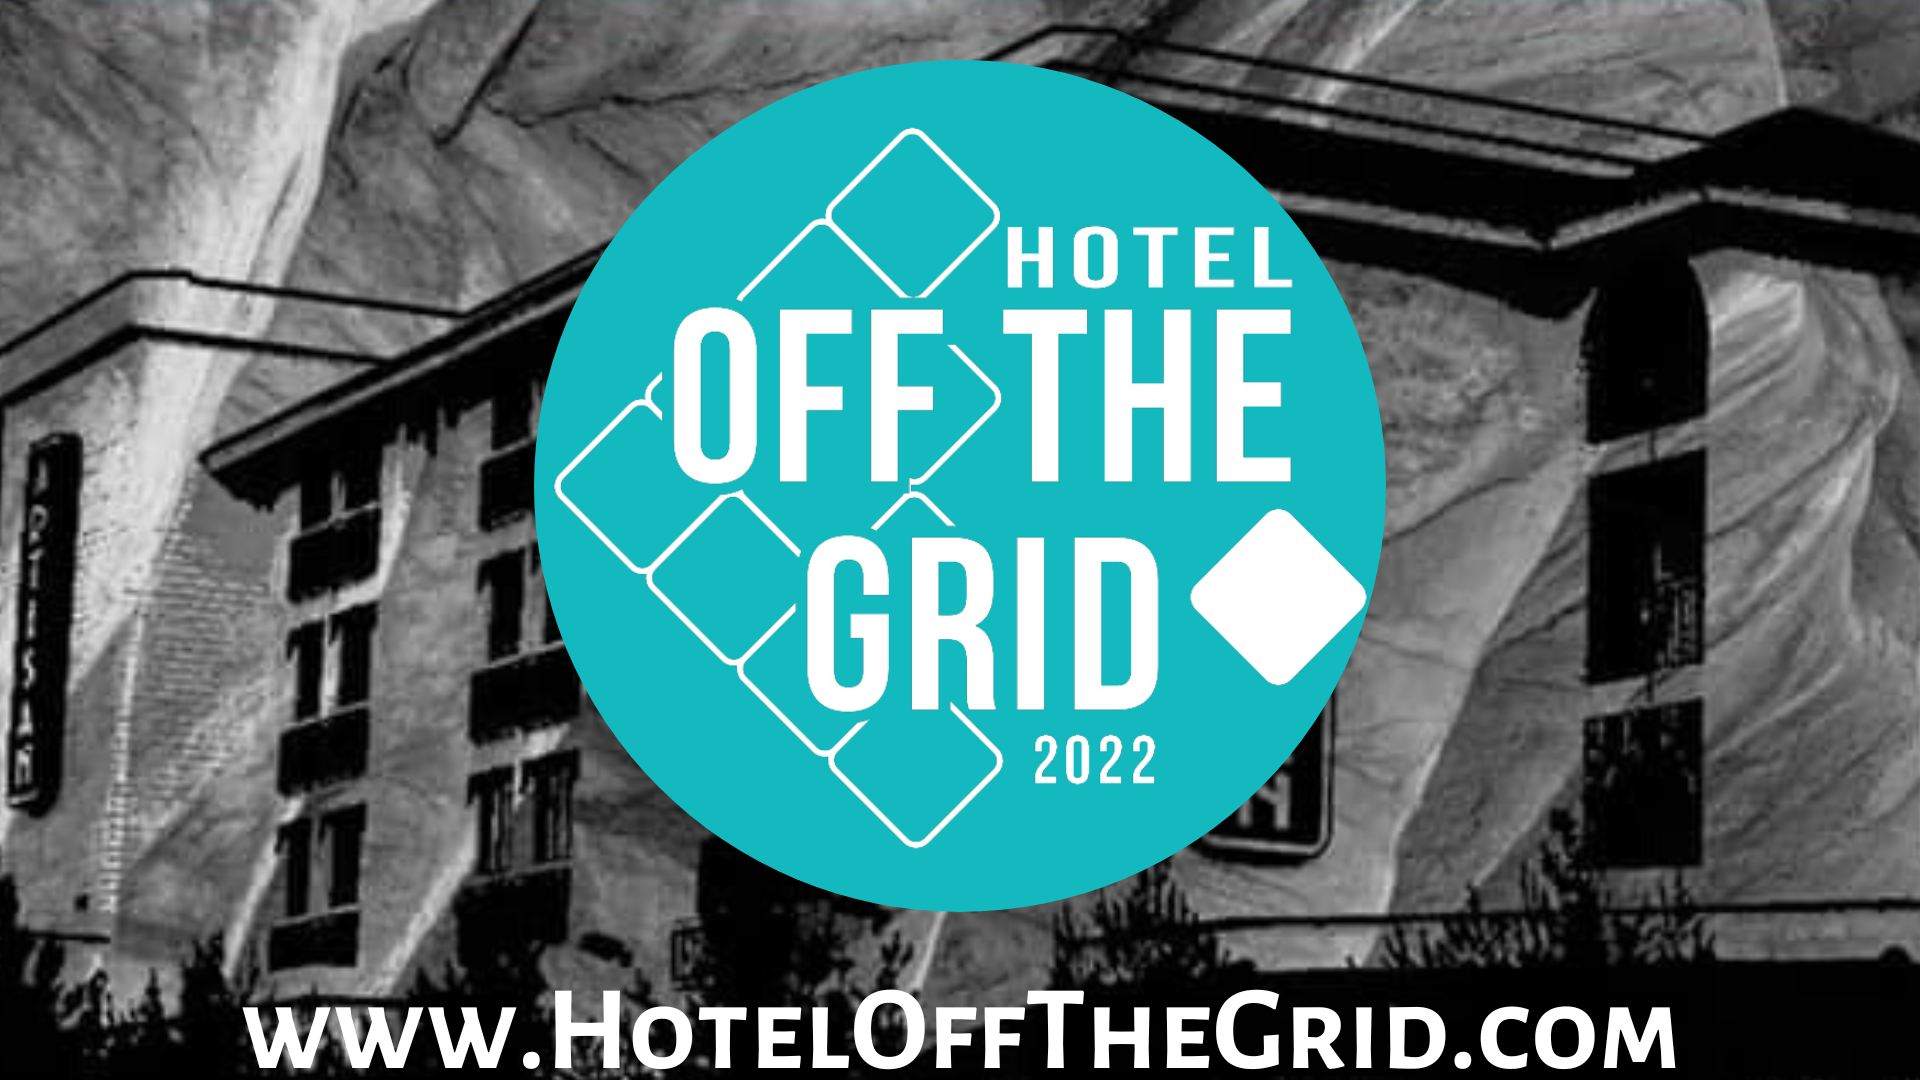 Hotel Off The Grid - フライヤー表